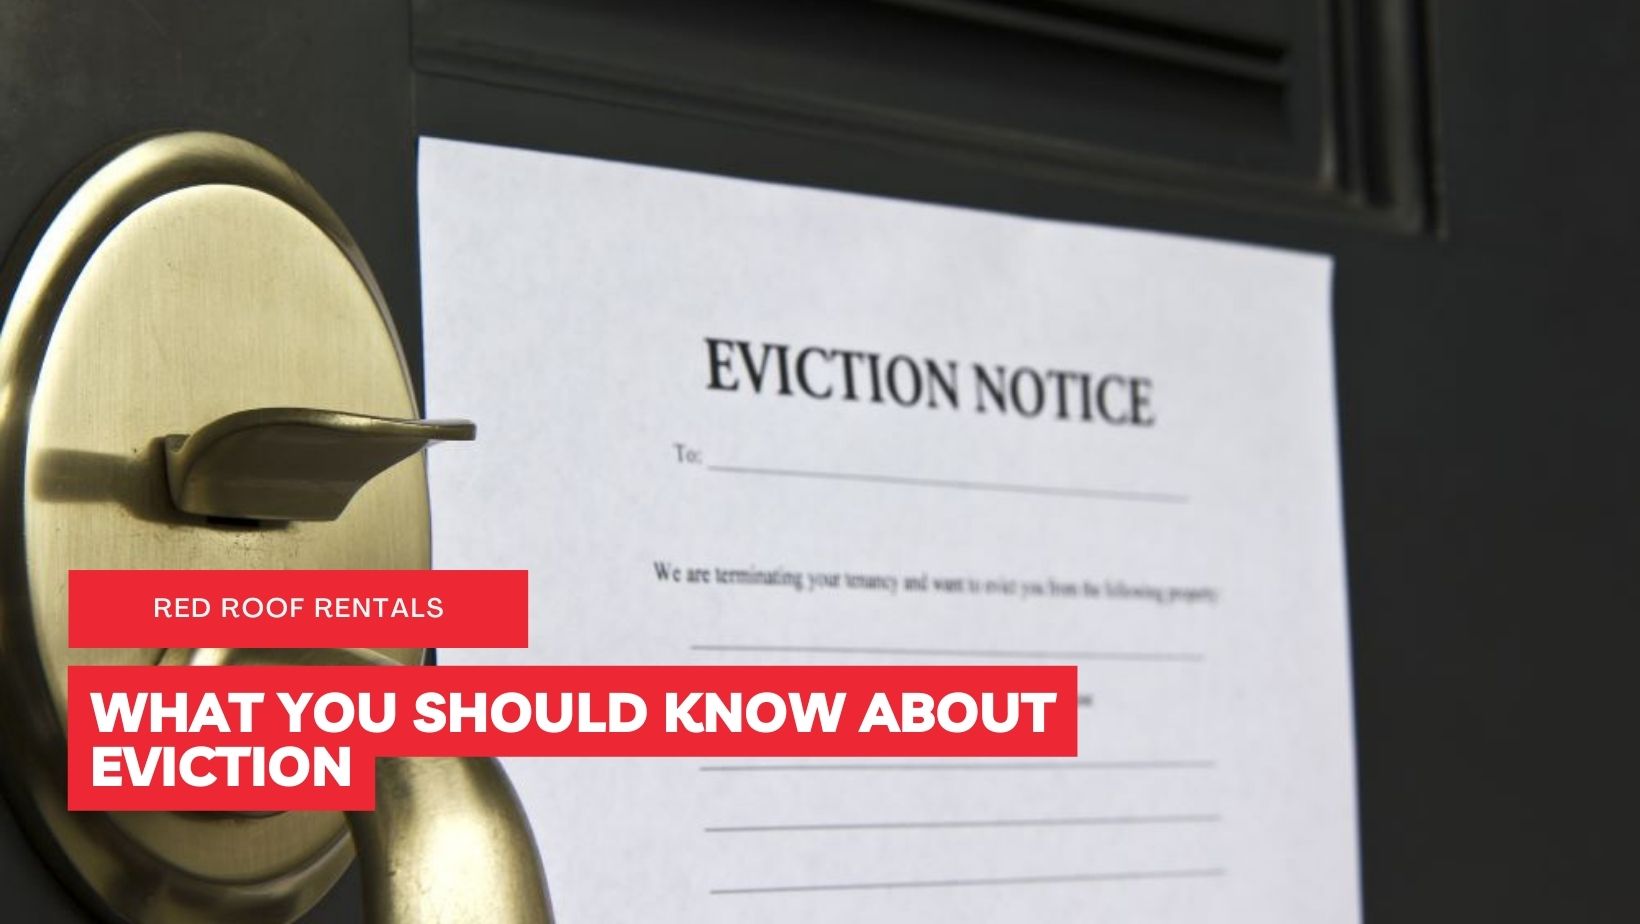 WHAT YOU SHOULD KNOW ABOUT EVICTION